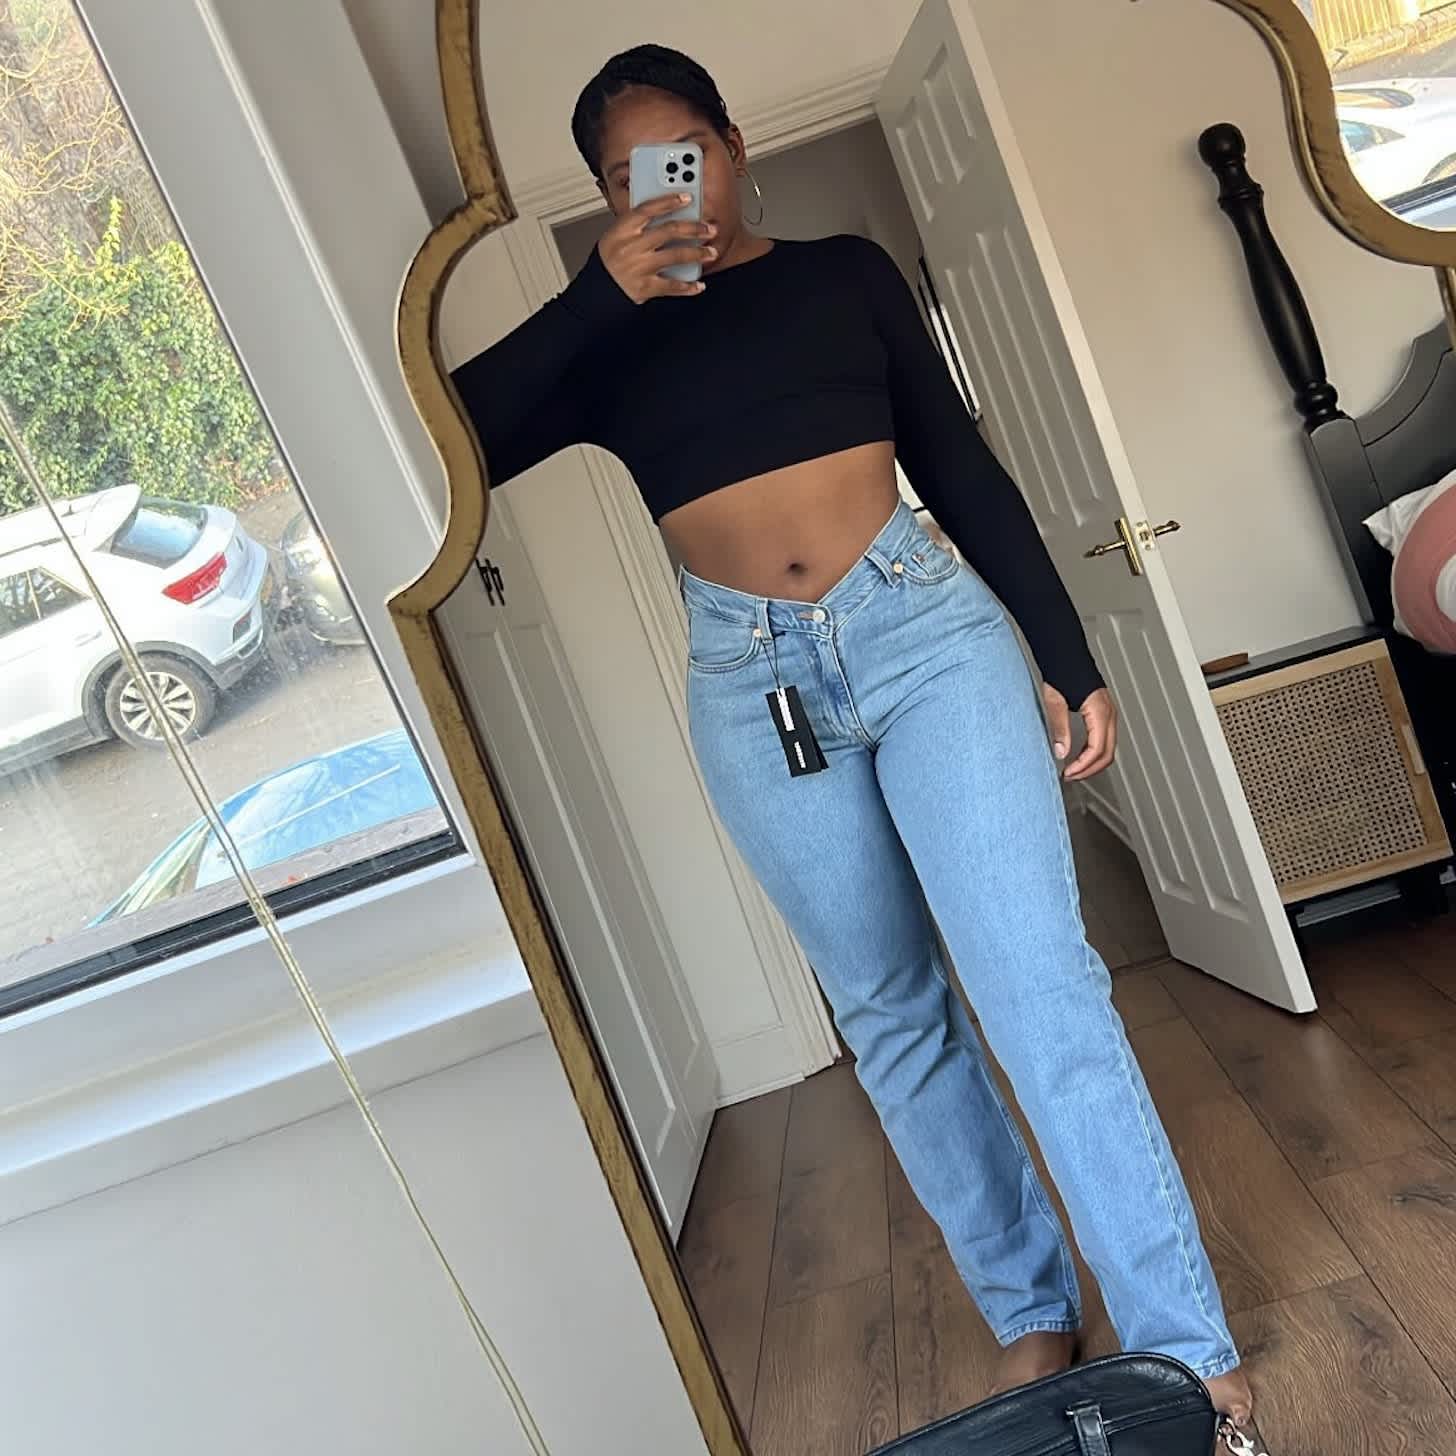 The V-Waist Jean Is the Genius Spring Denim Trend For an Hourglass